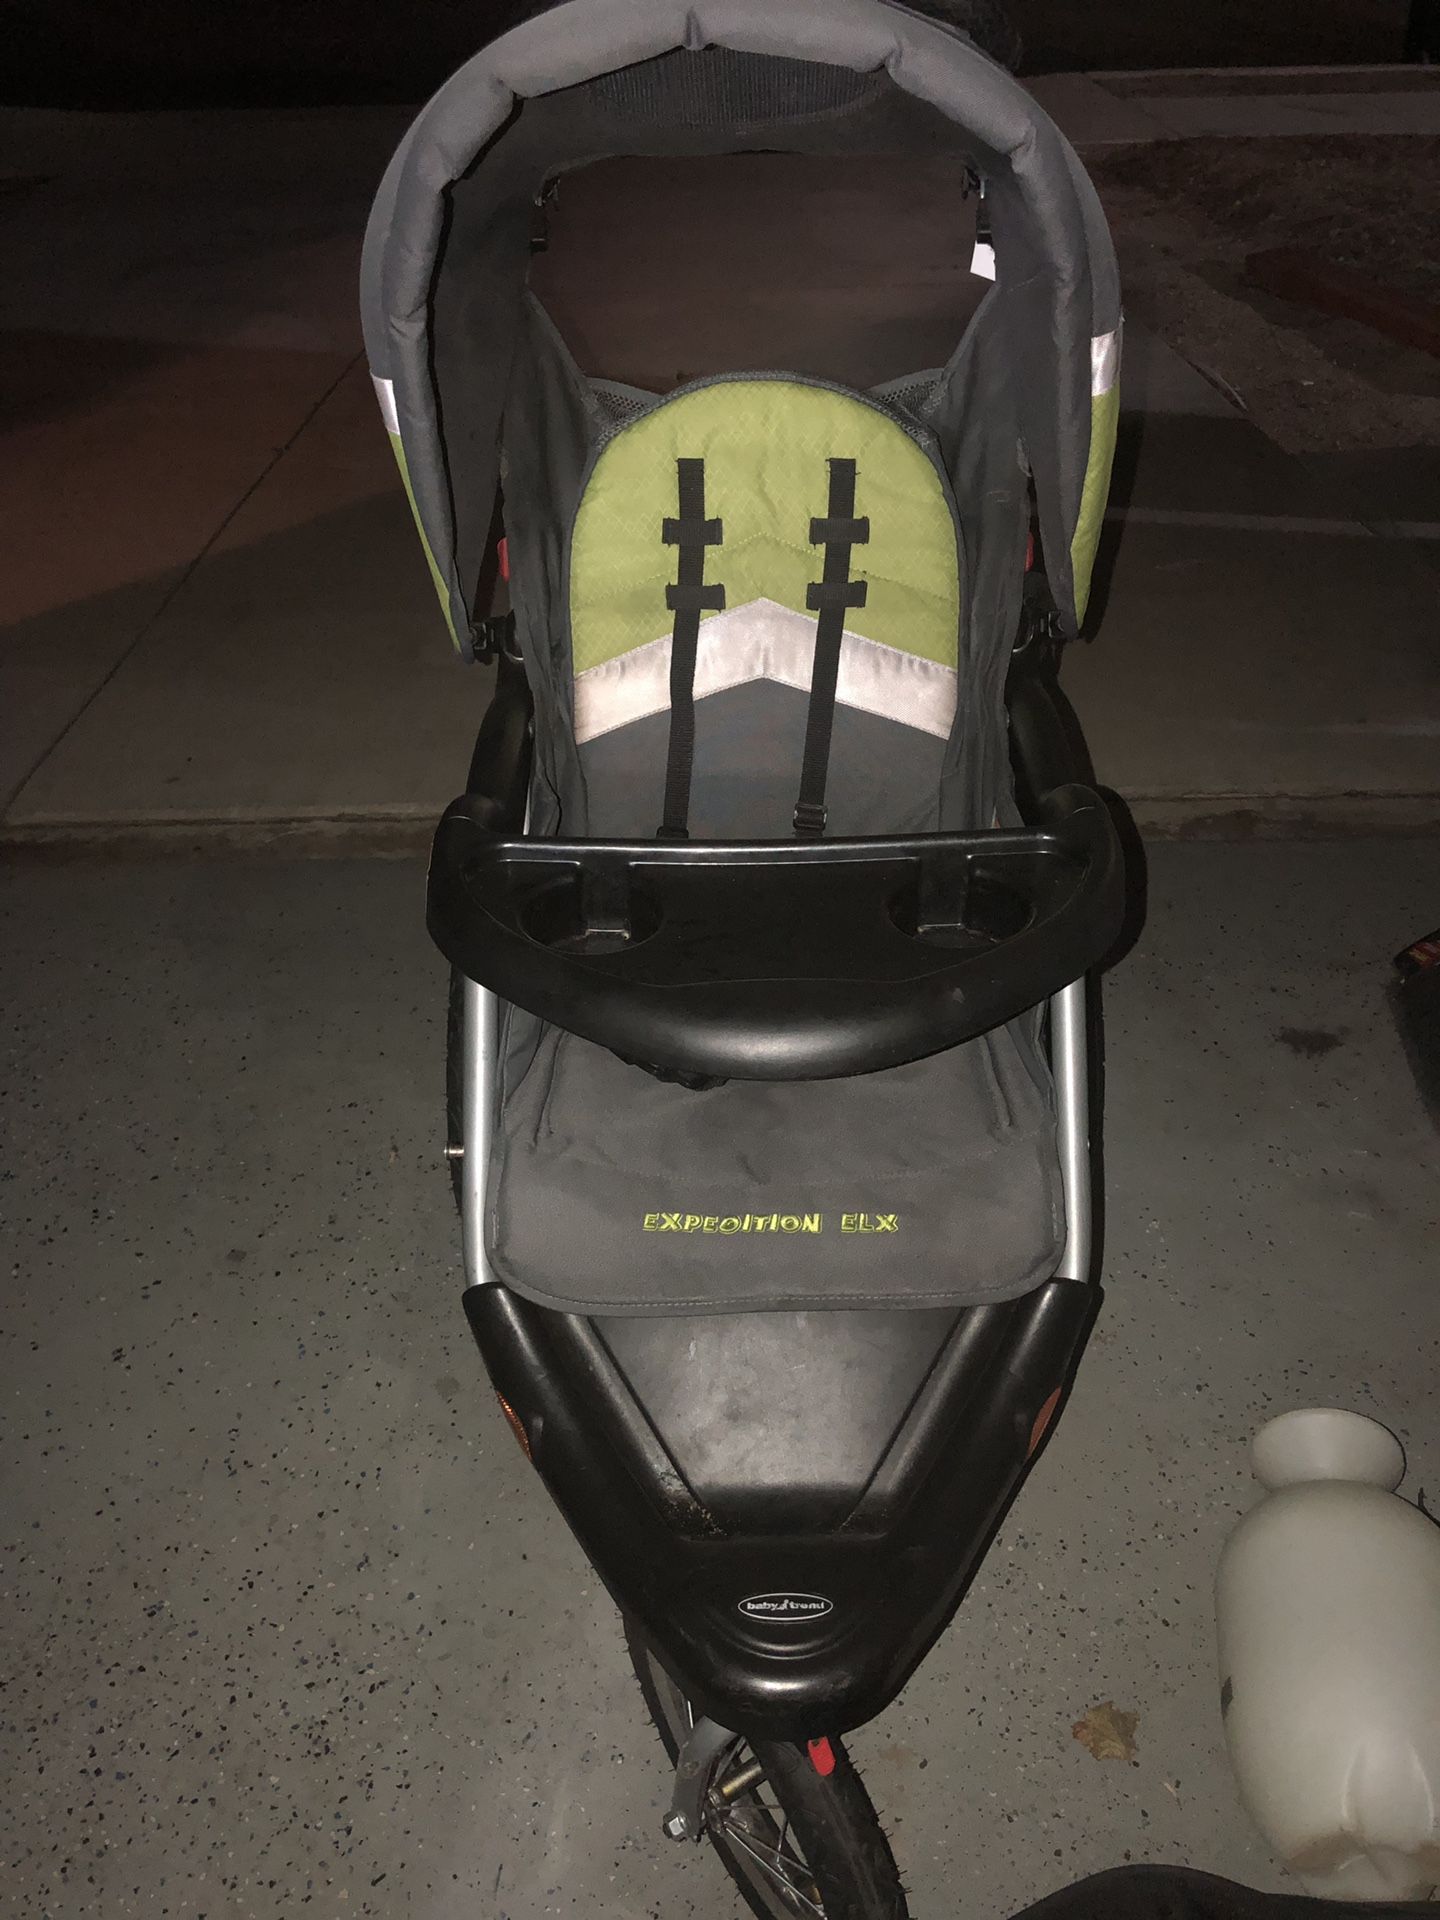 Baby trend stroller with audio speakers